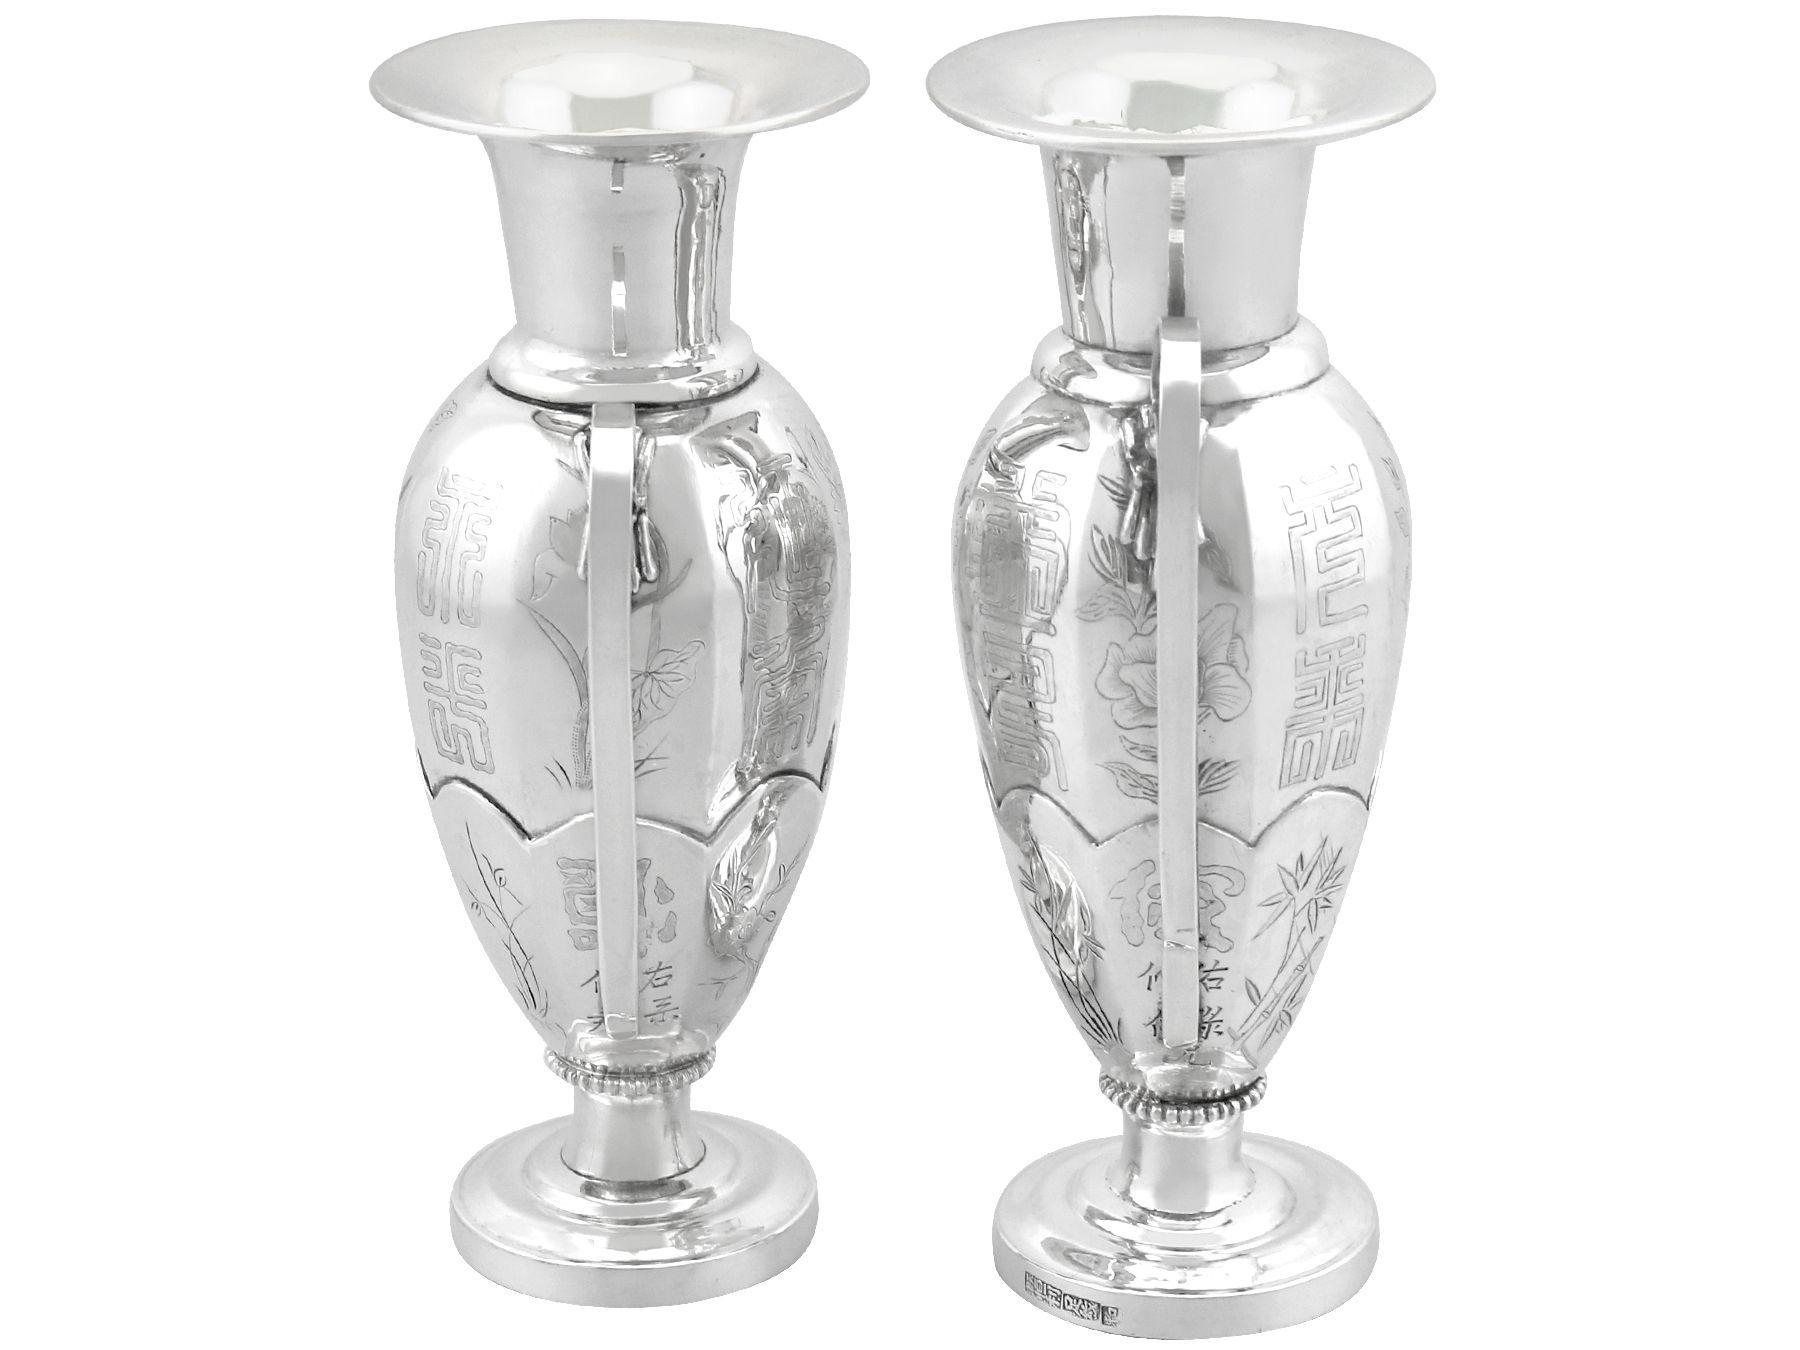 An exceptional, fine and impressive pair of antique Chinese export silver vases; an addition to our ornamental silverware collection.

These impressive antique Chinese Export silver vases have a circular panelled baluster form.

The surface of